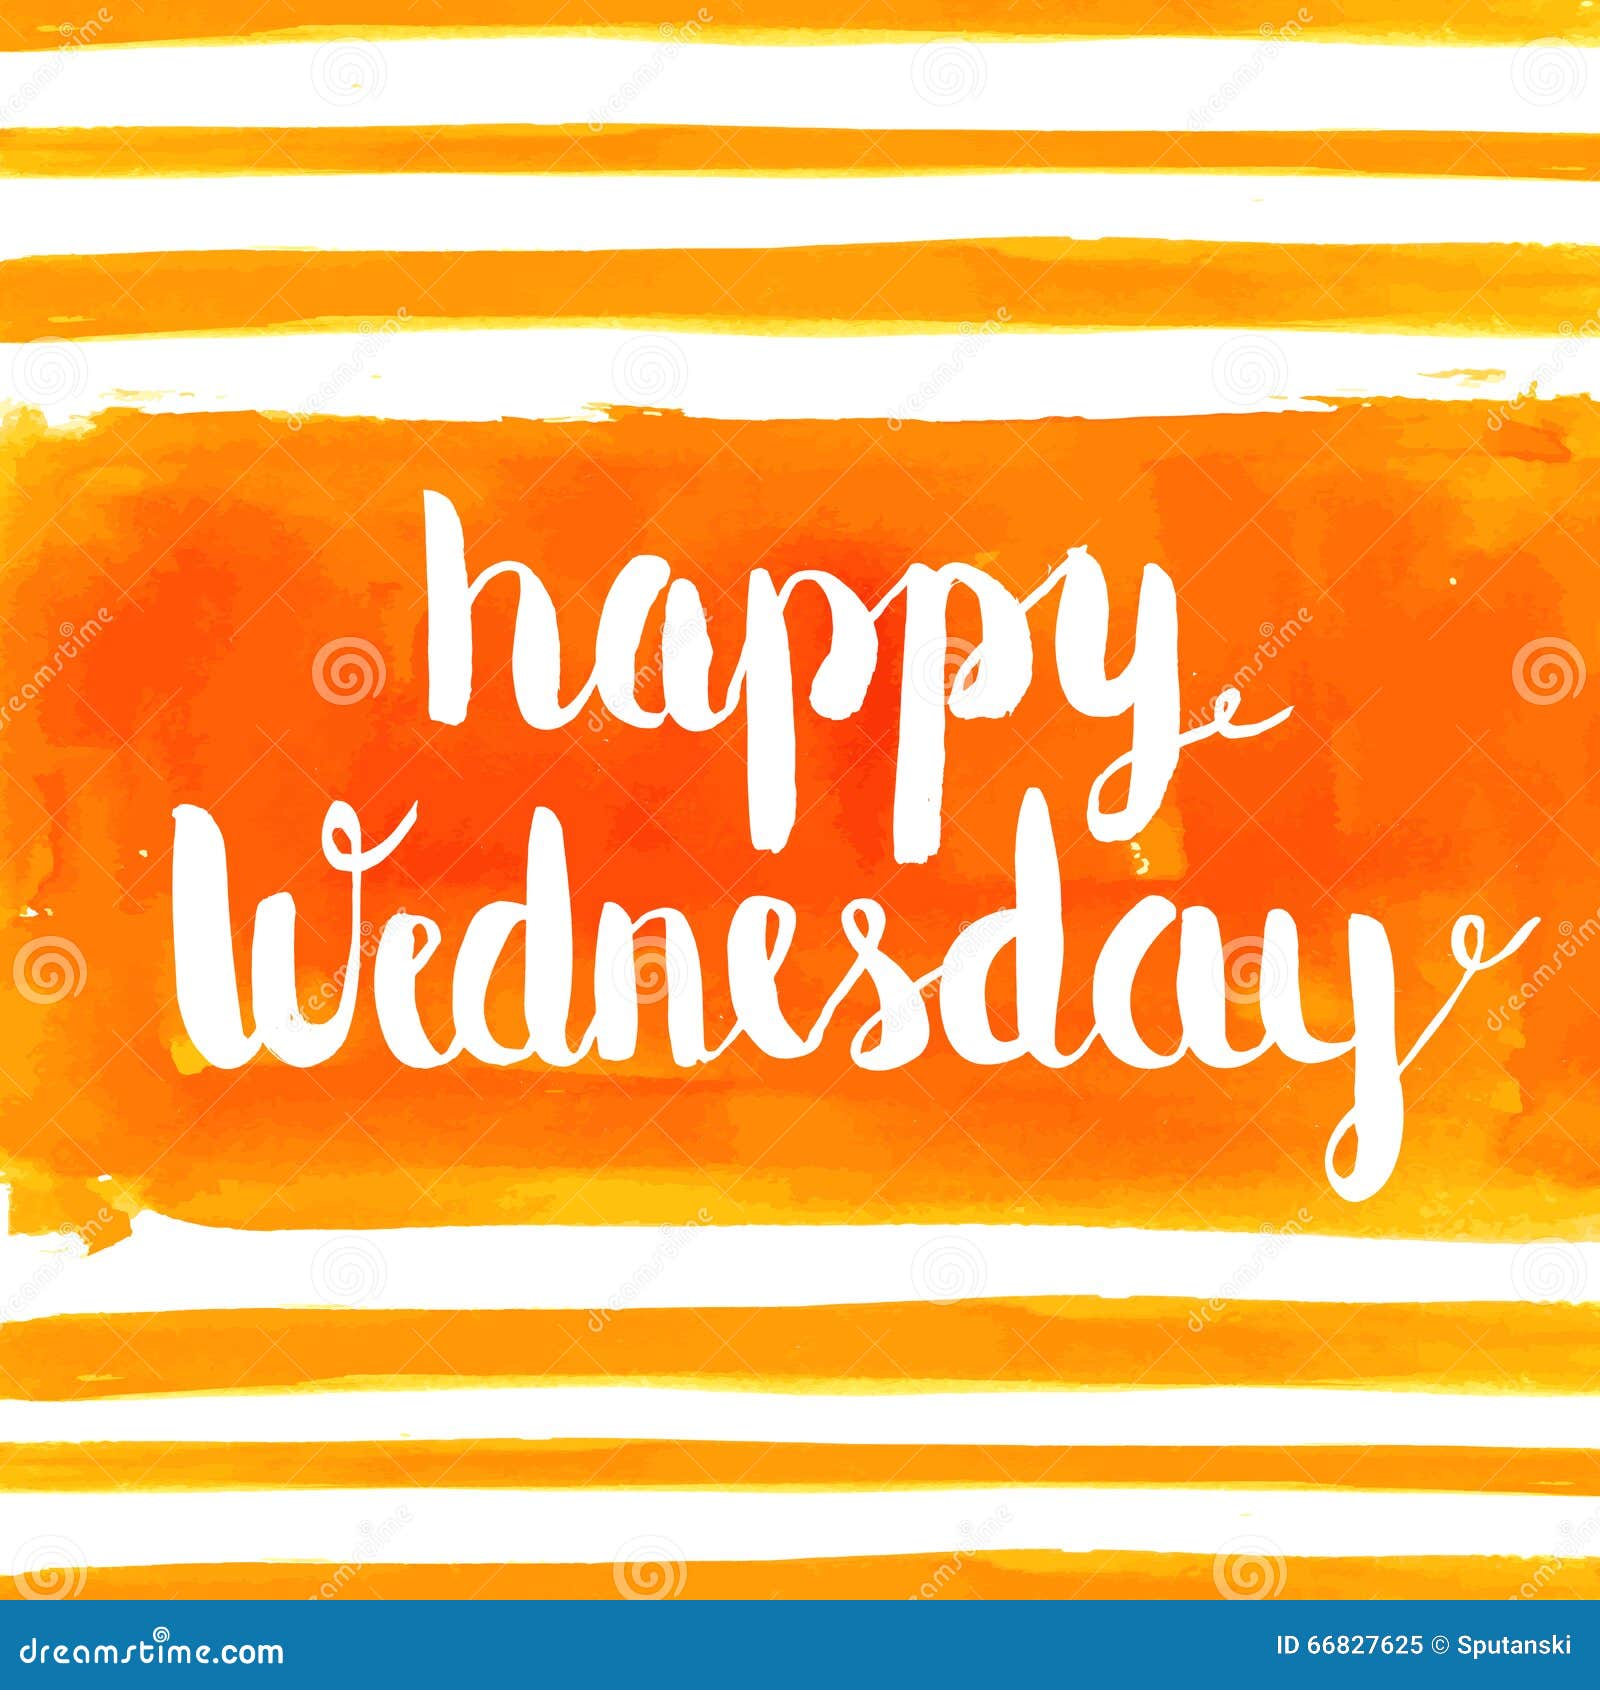 happy wednesday watercolor hand paint greeting card background vector 66827625